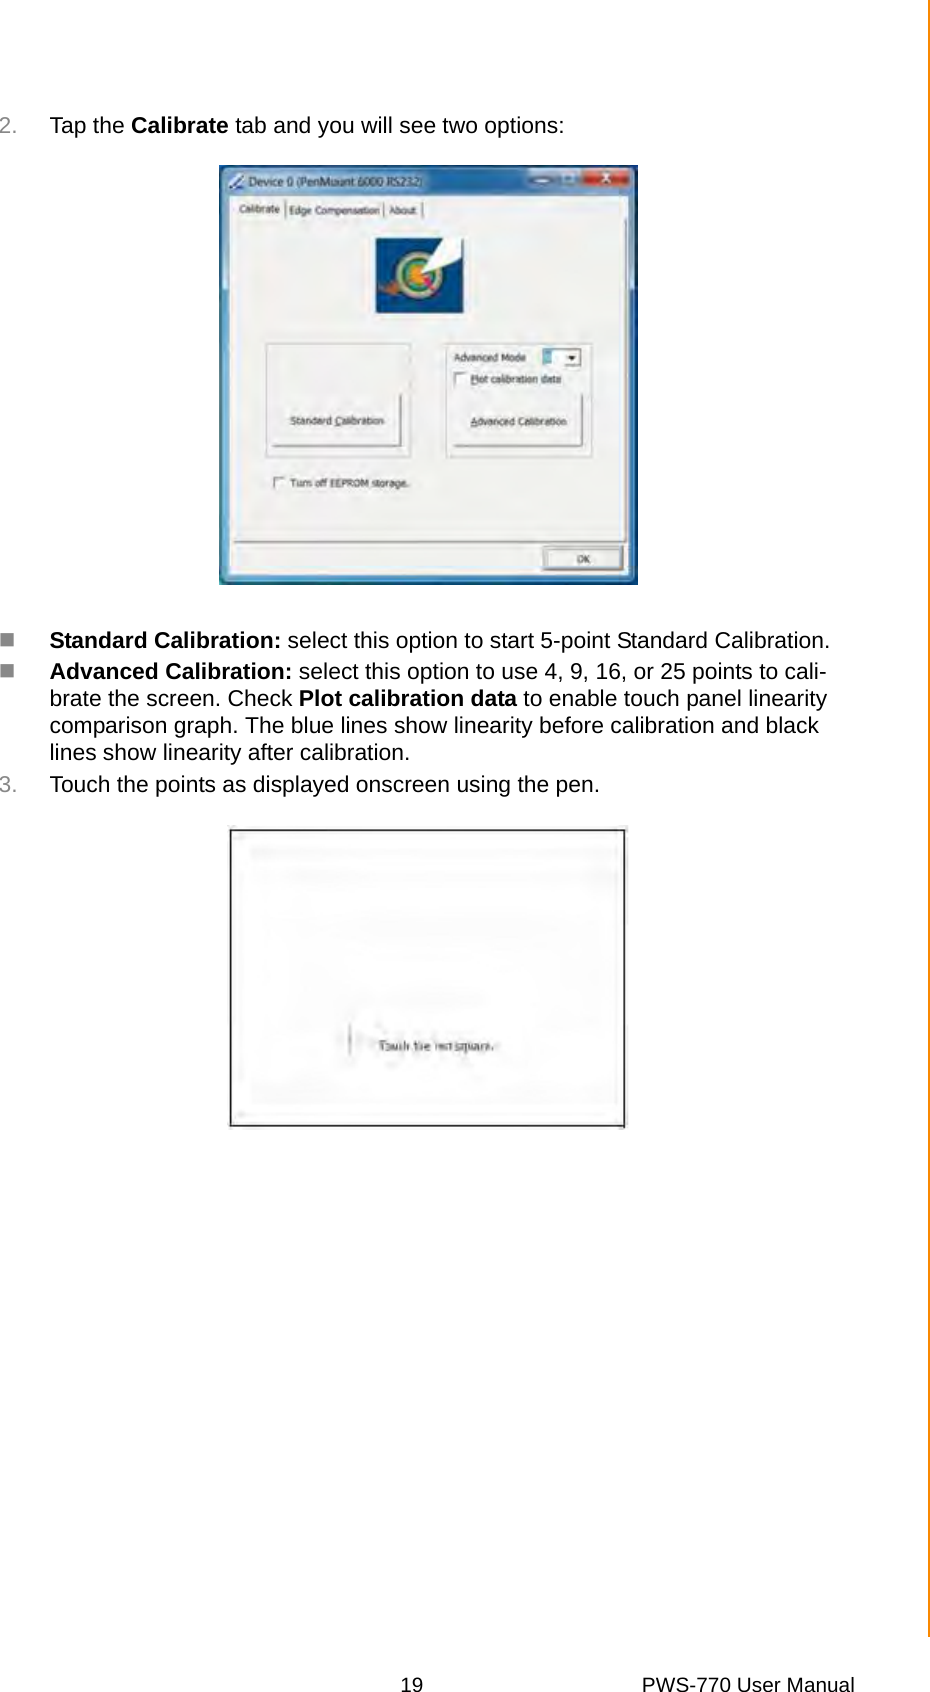 19 PWS-770 User ManualChapter 4 Turning On2. Tap the Calibrate tab and you will see two options:Standard Calibration: select this option to start 5-point Standard Calibration.Advanced Calibration: select this option to use 4, 9, 16, or 25 points to cali-brate the screen. Check Plot calibration data to enable touch panel linearity comparison graph. The blue lines show linearity before calibration and black lines show linearity after calibration.3. Touch the points as displayed onscreen using the pen.